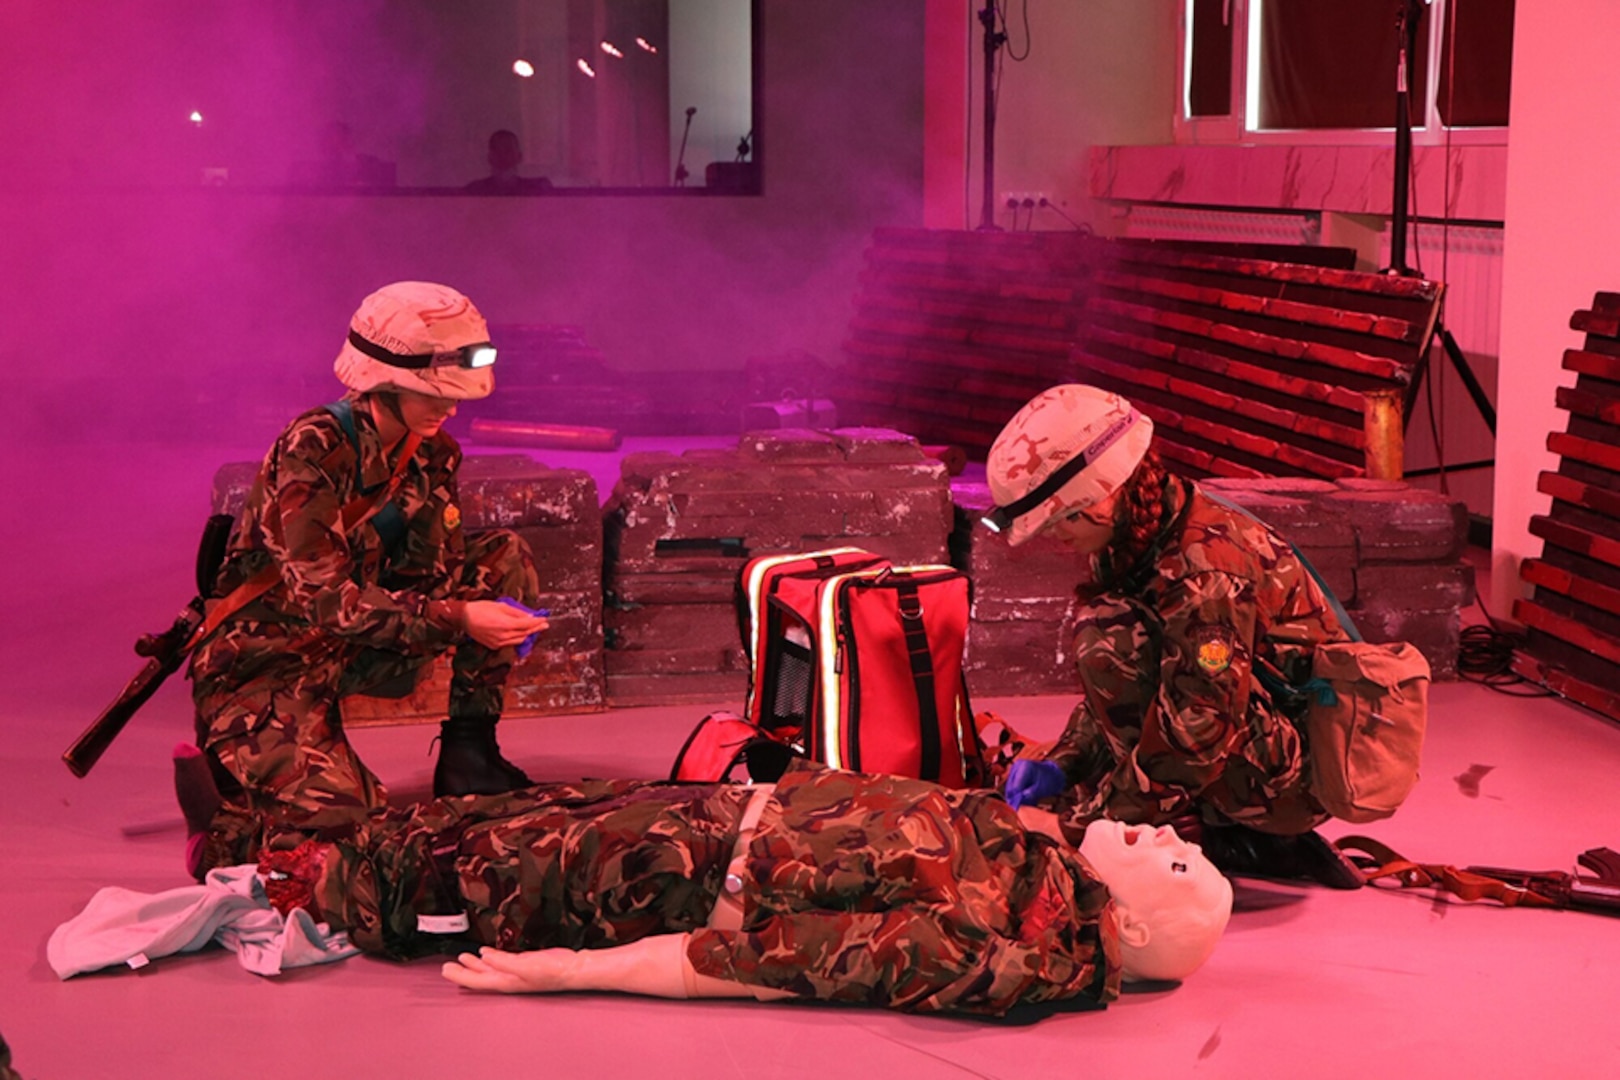 Bulgarian combat medics treat a simulated casualty at the Bulgarian Military Medical Simulation Center in Sofia, Bulgaria, 10 August, 2022.